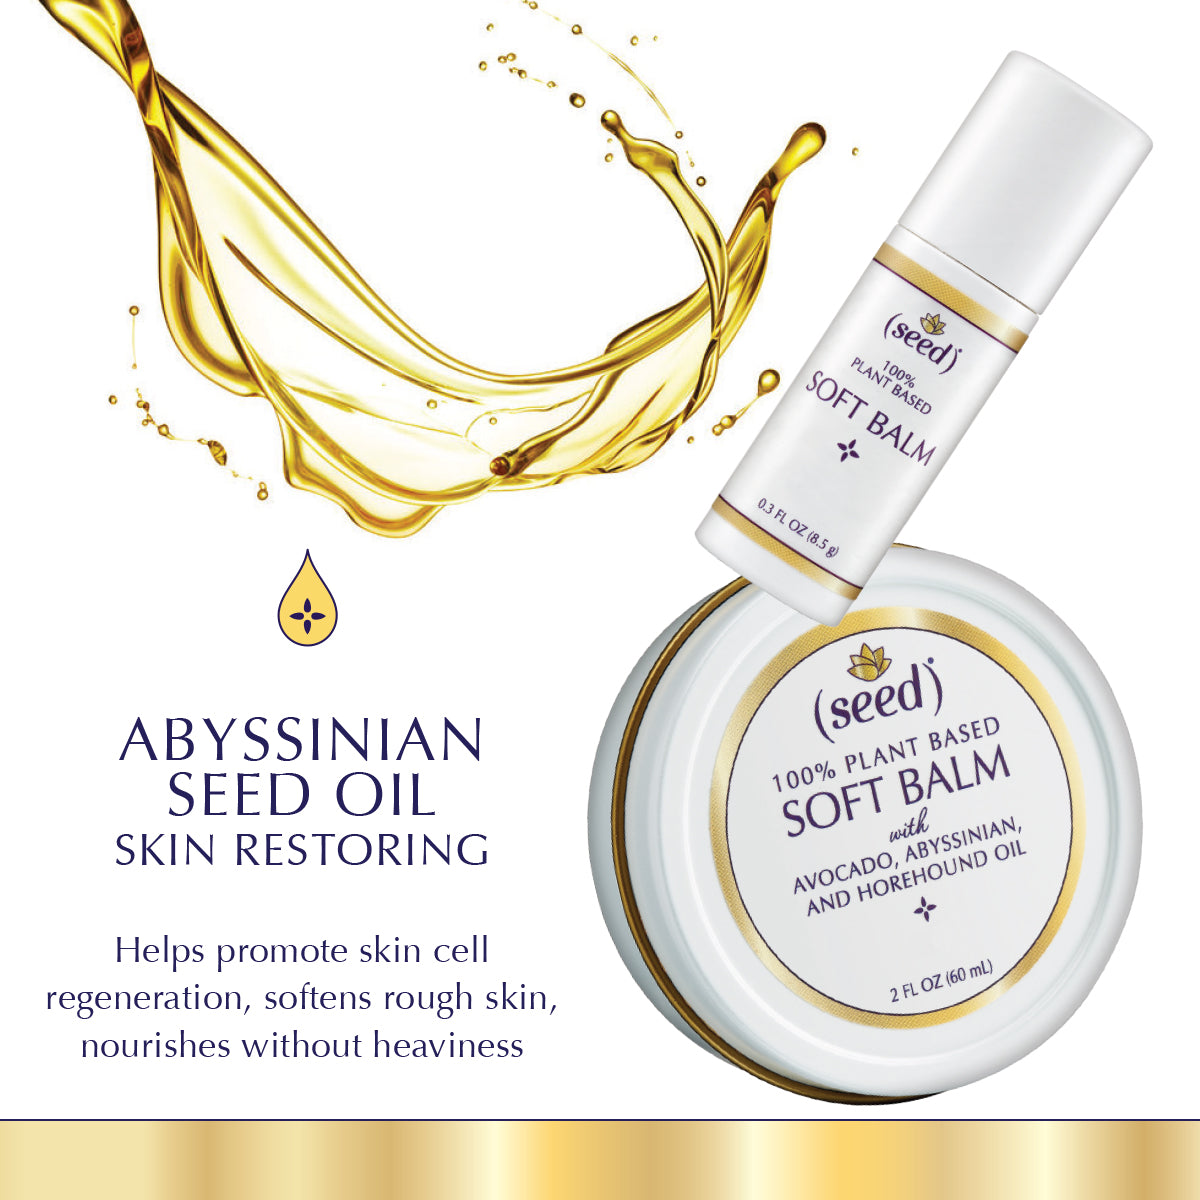 Seed Soft Balms feature abyssinian oil to help restore skin